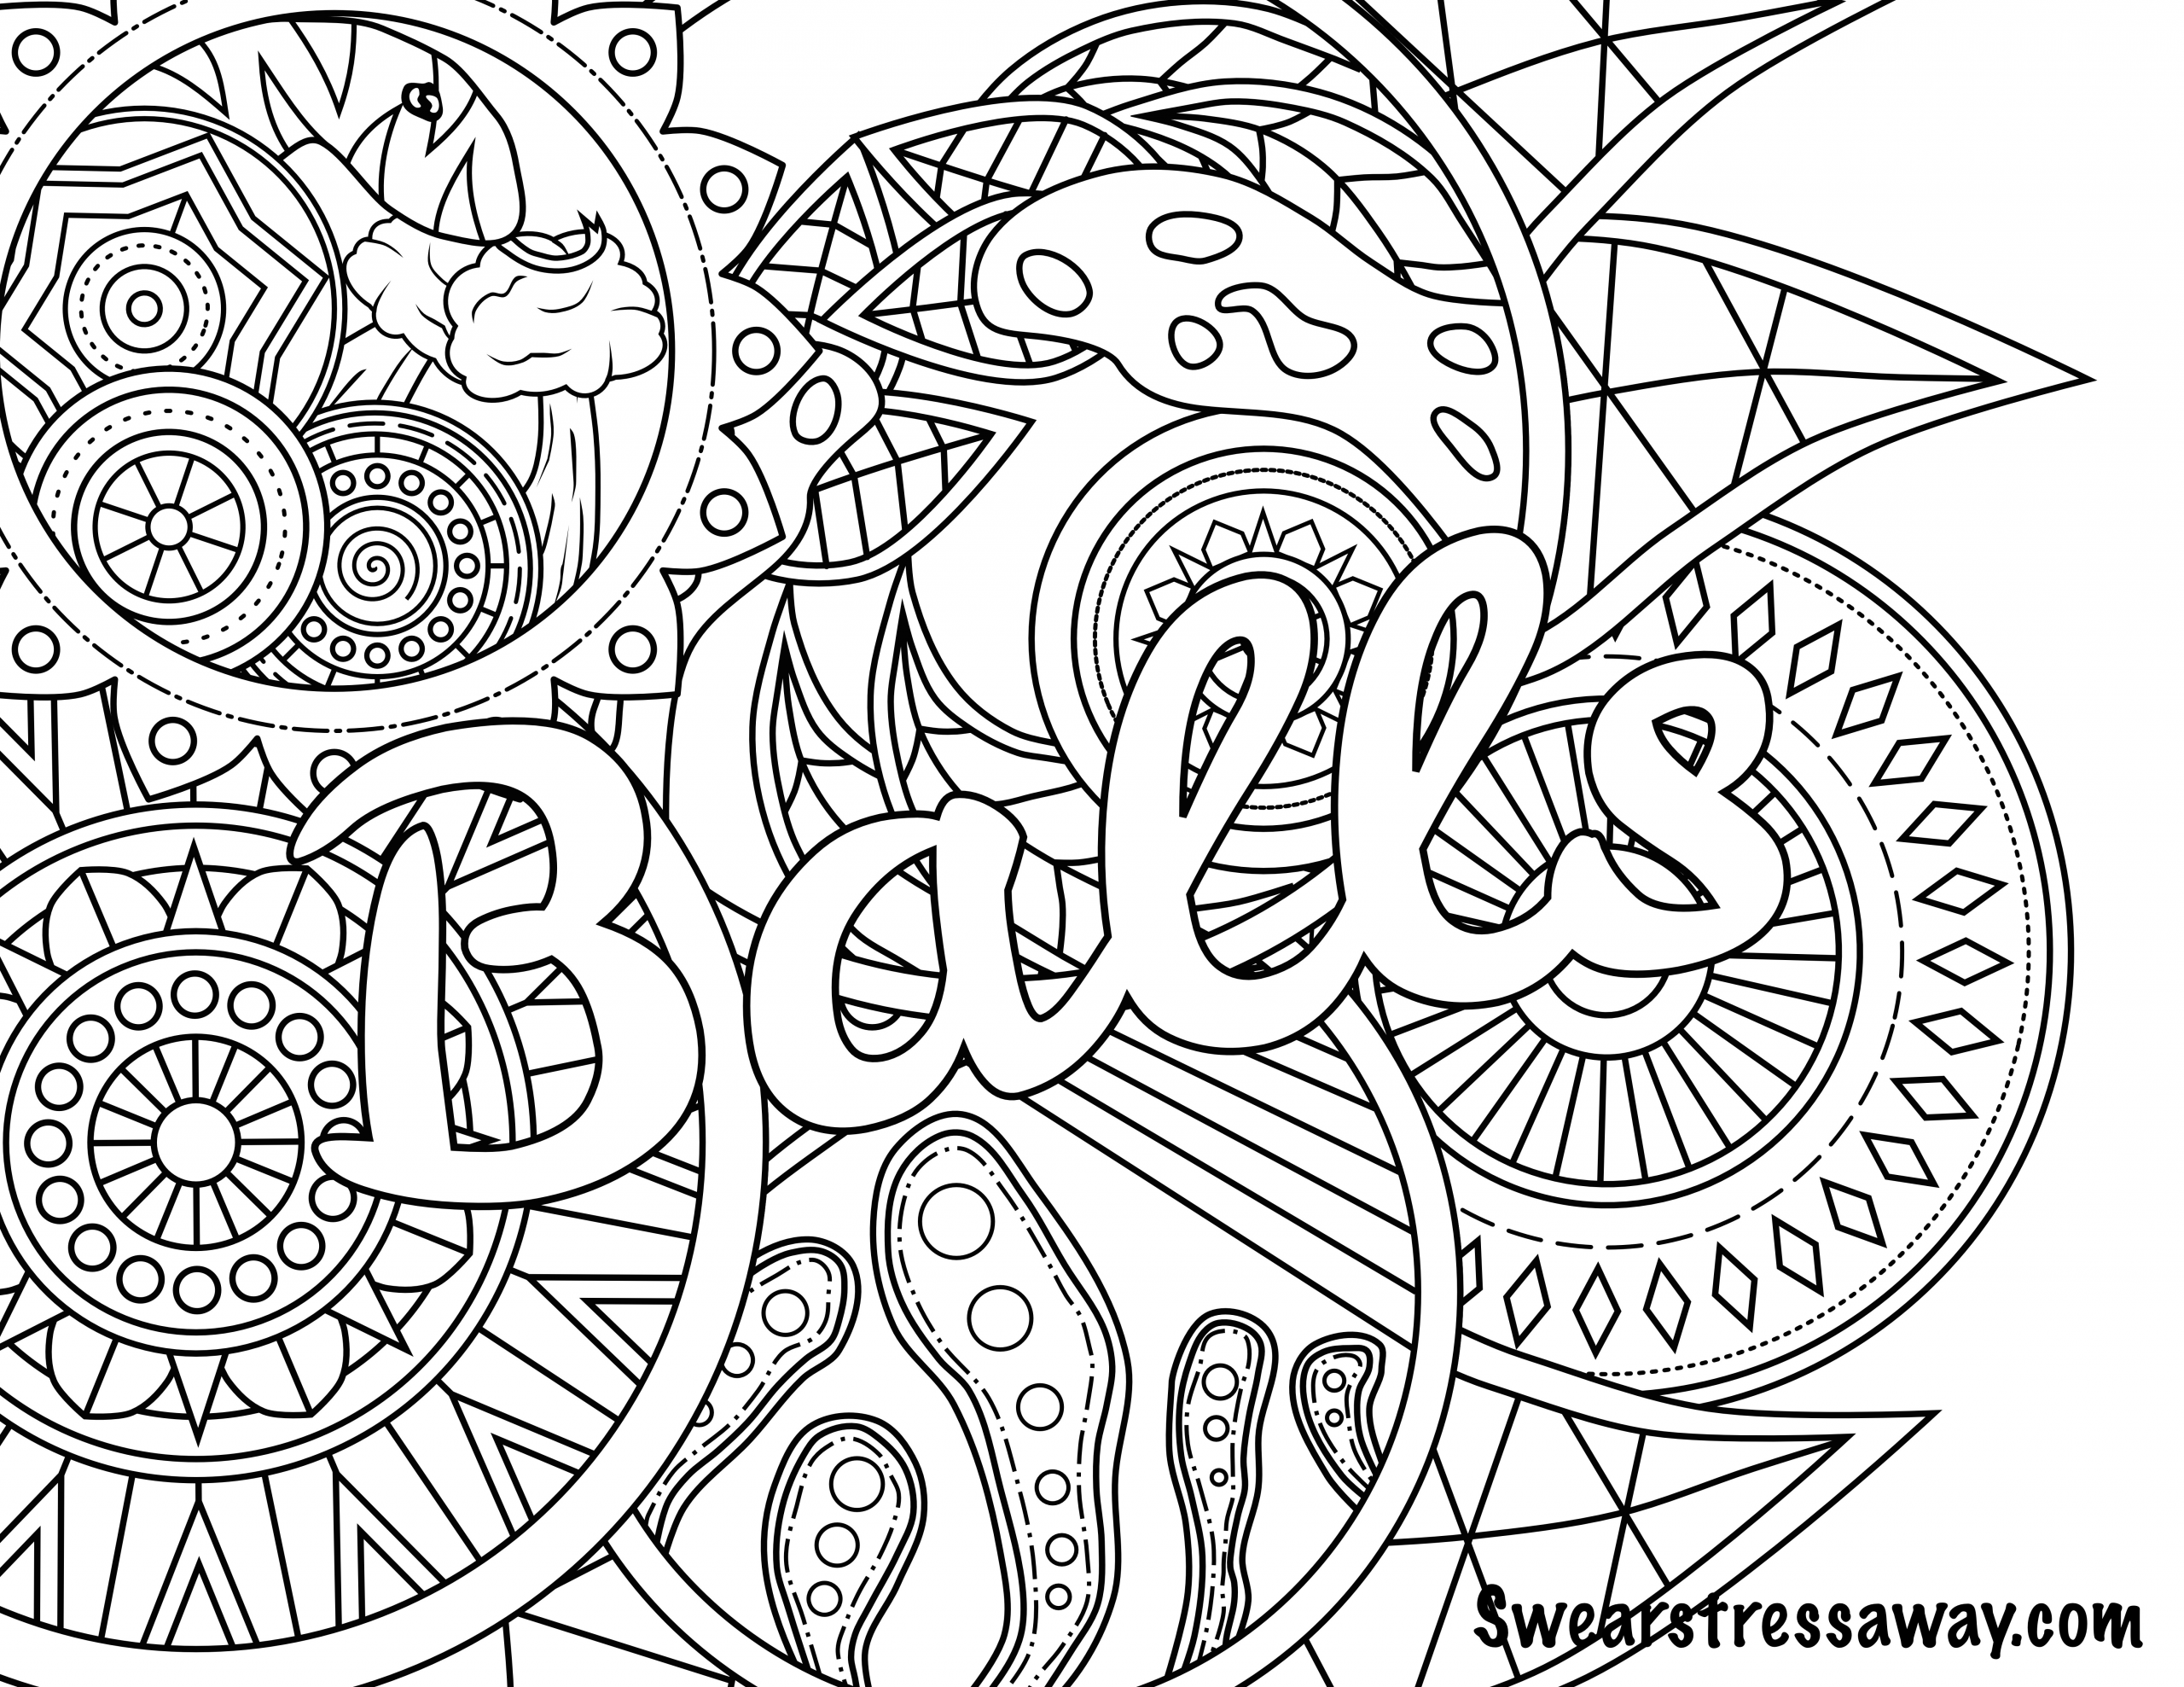 Adult Swear Coloring Pages
 The Best Ideas for Coloring Pages for Adults Words Best